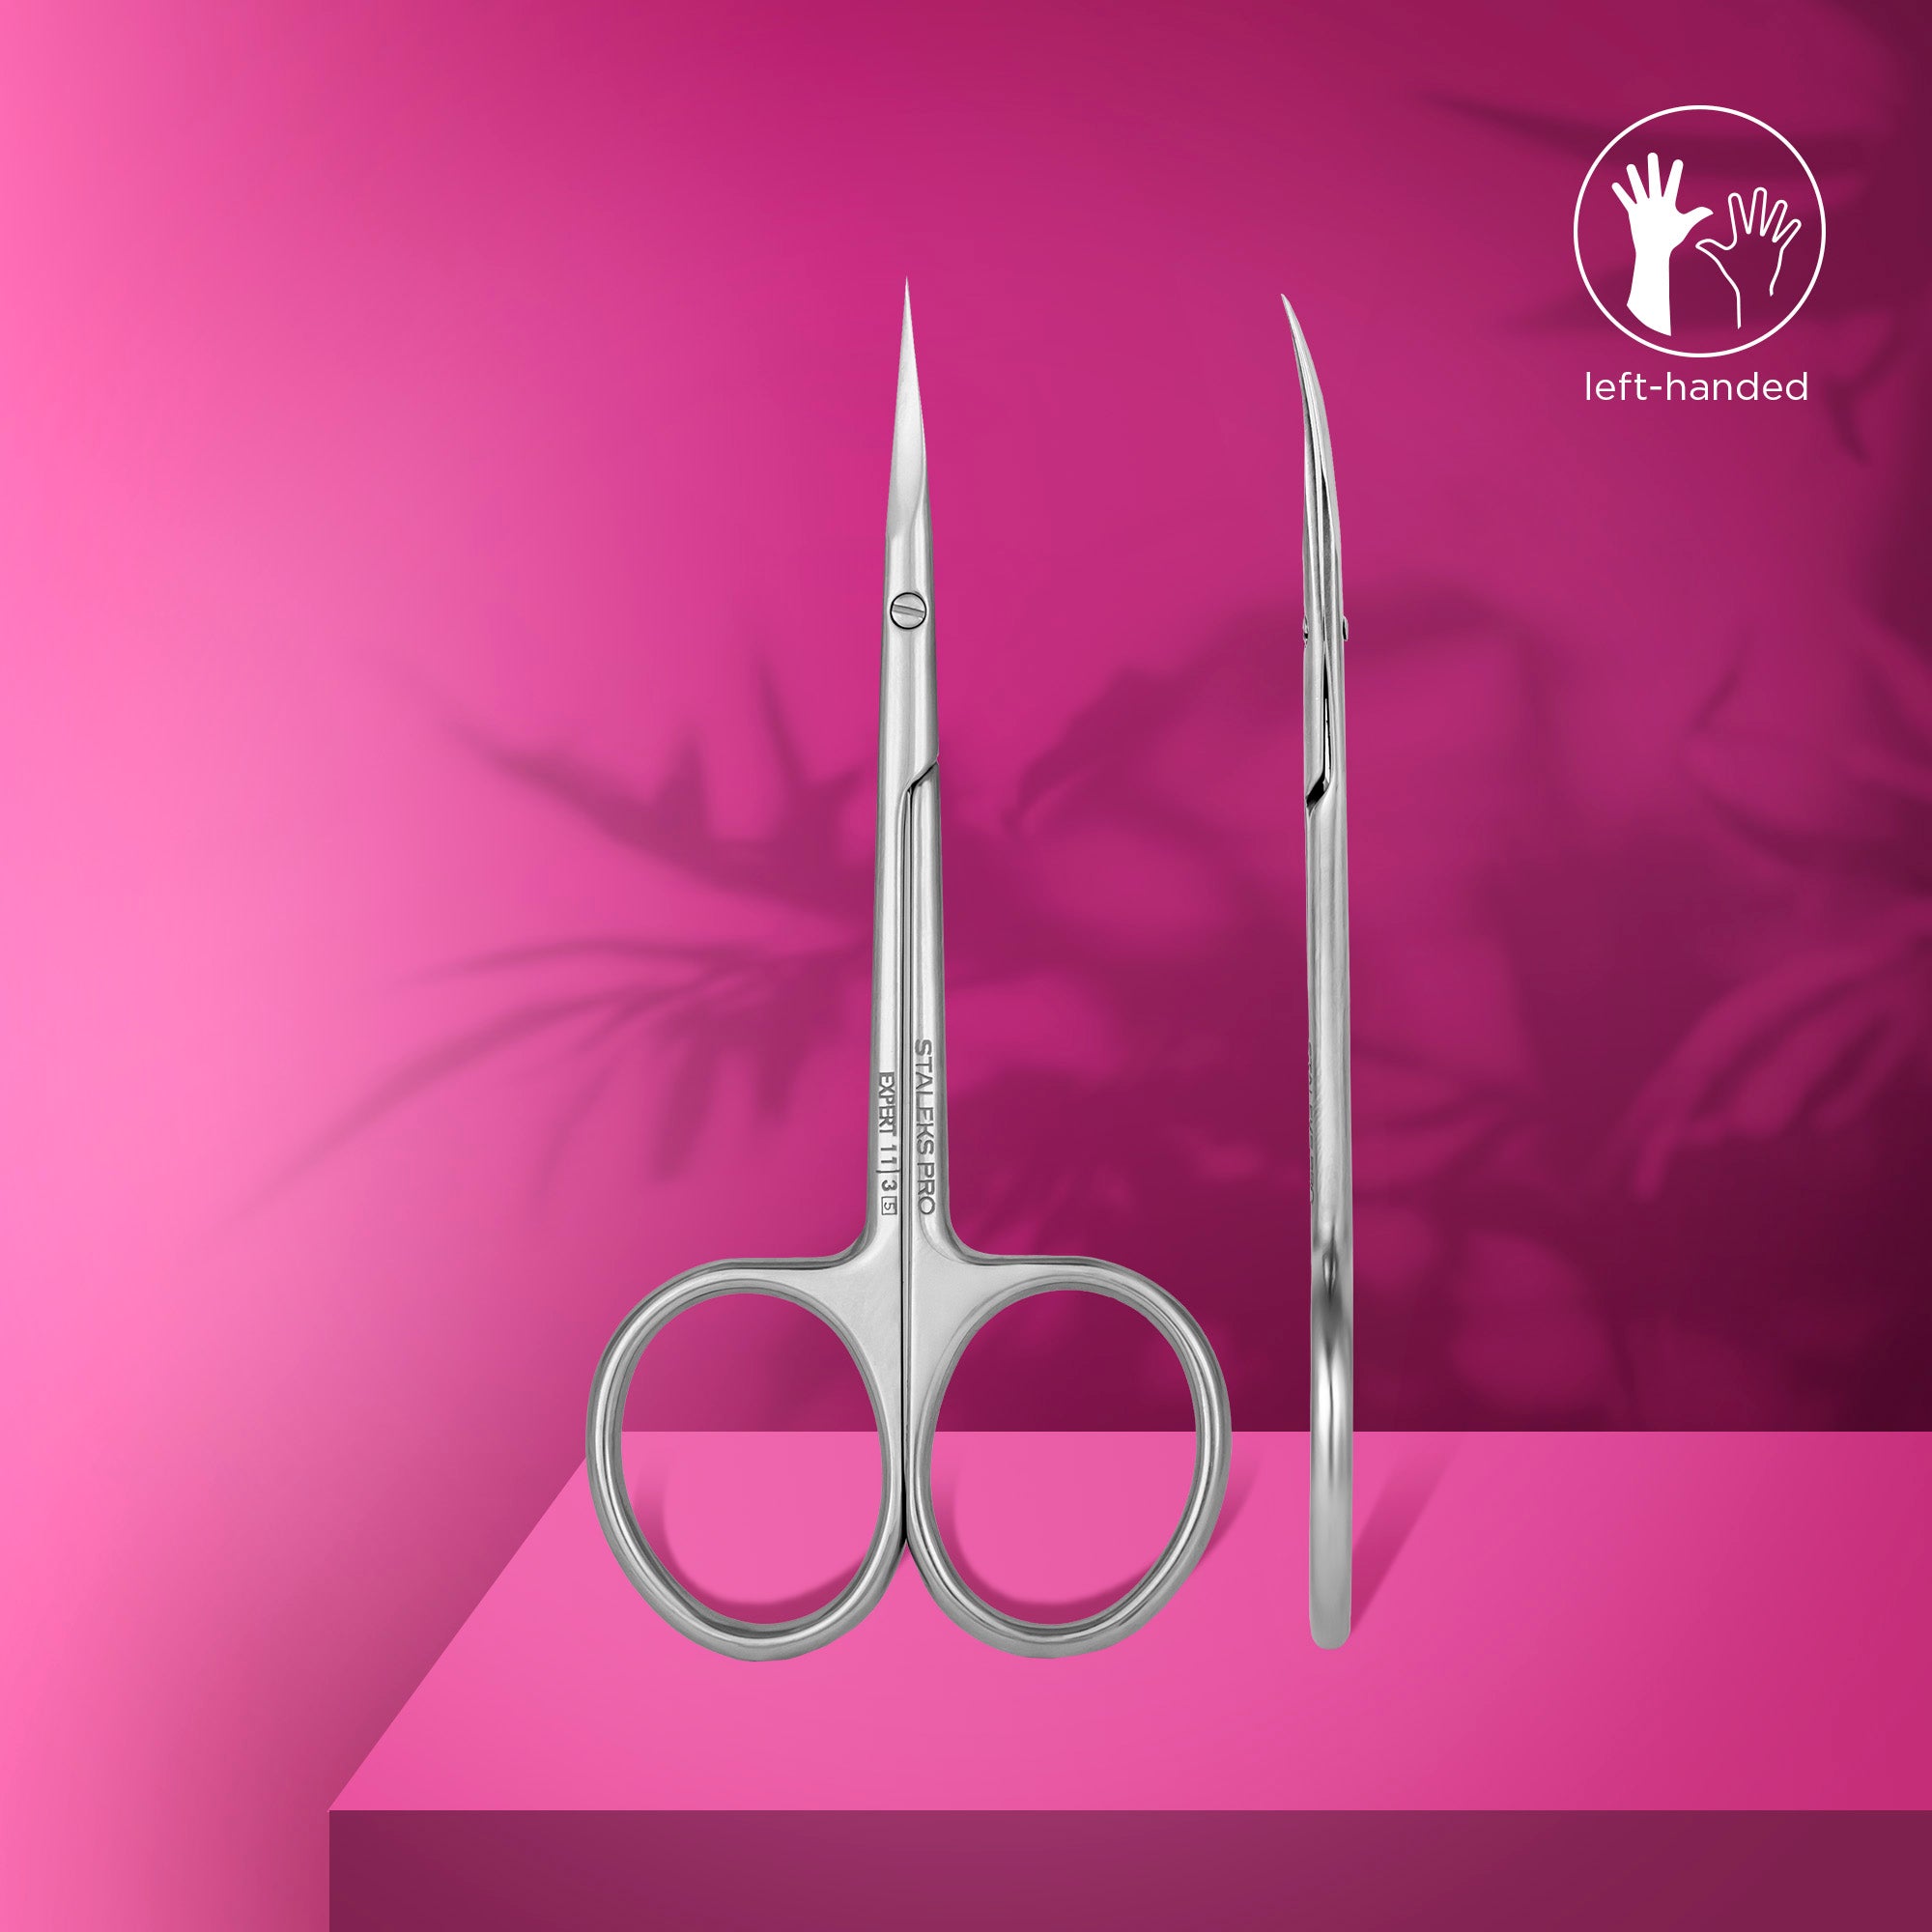 Staleks Pro Cuticle Scissors - For Left Handed Users